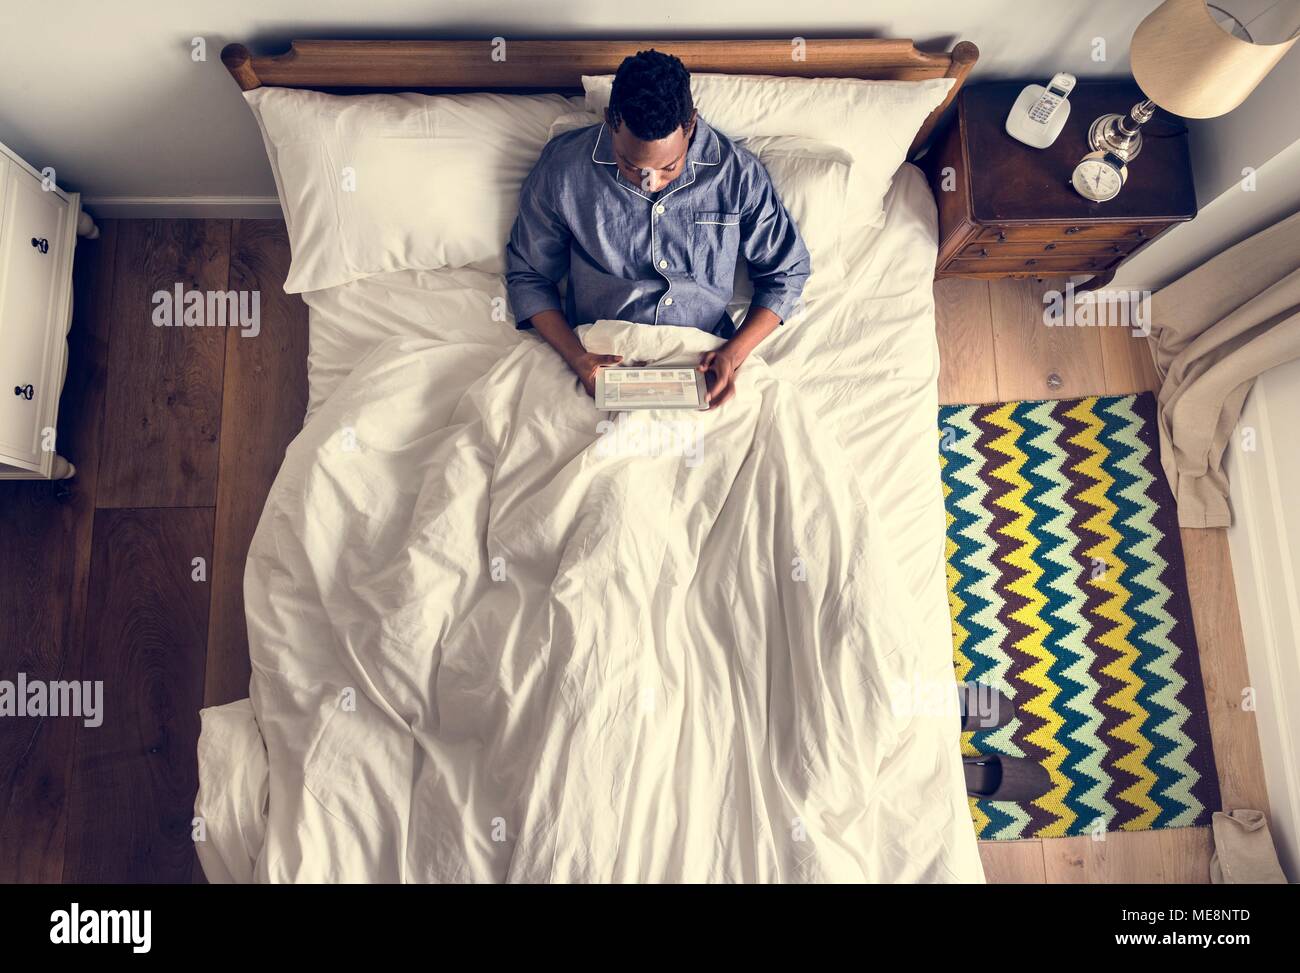 Man in bed using a digital device Stock Photo